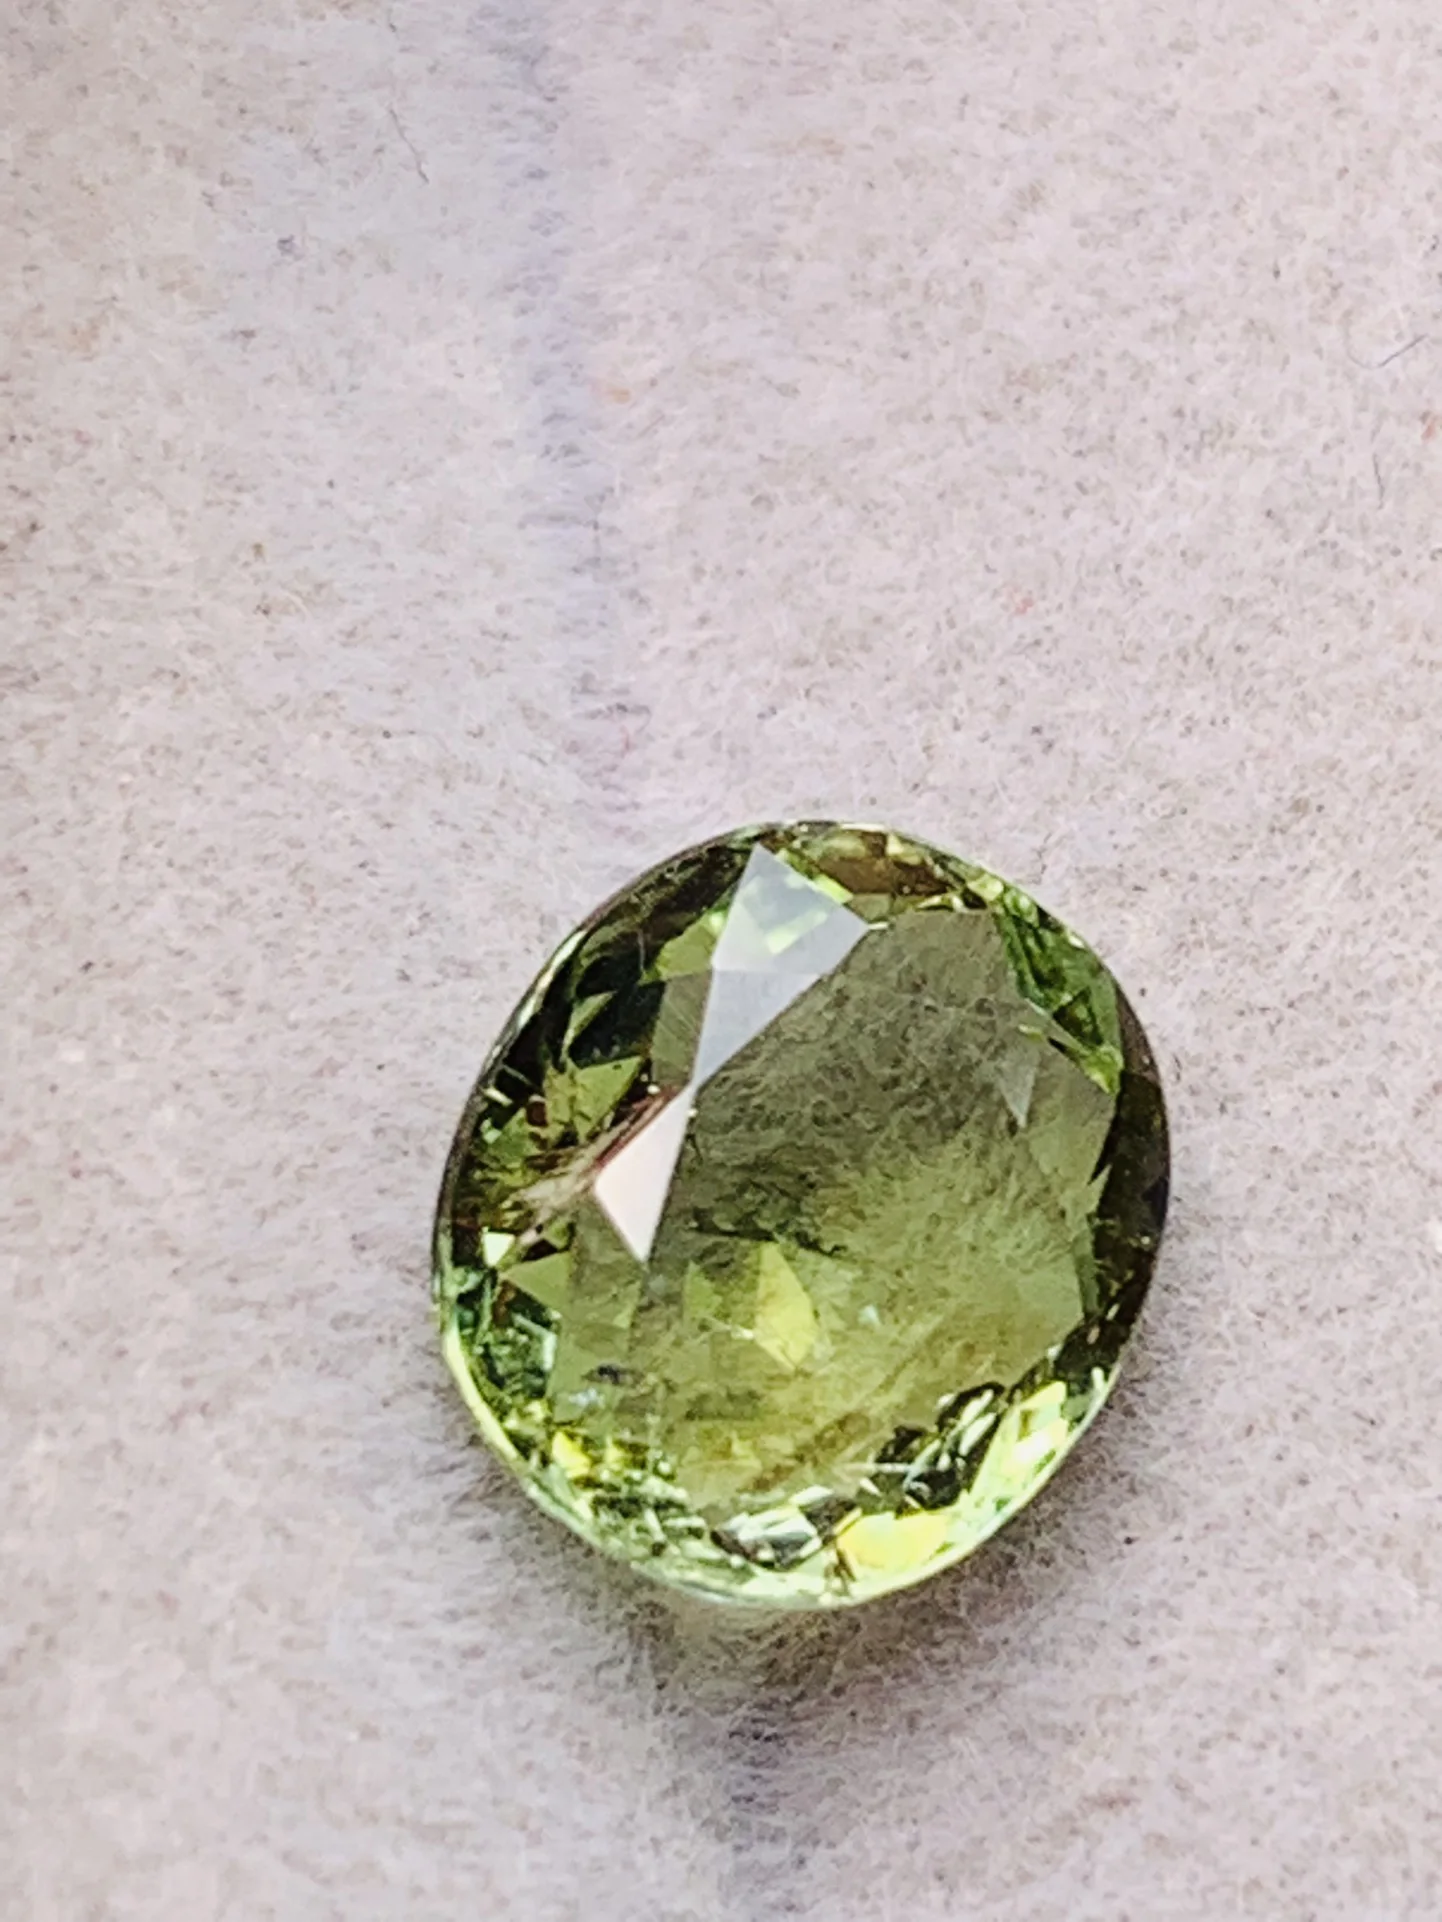 Pure natural green tourmaline loose stone inlaid with rings pendant necklace bright Oval Square Thai cut accessories gem jewelry